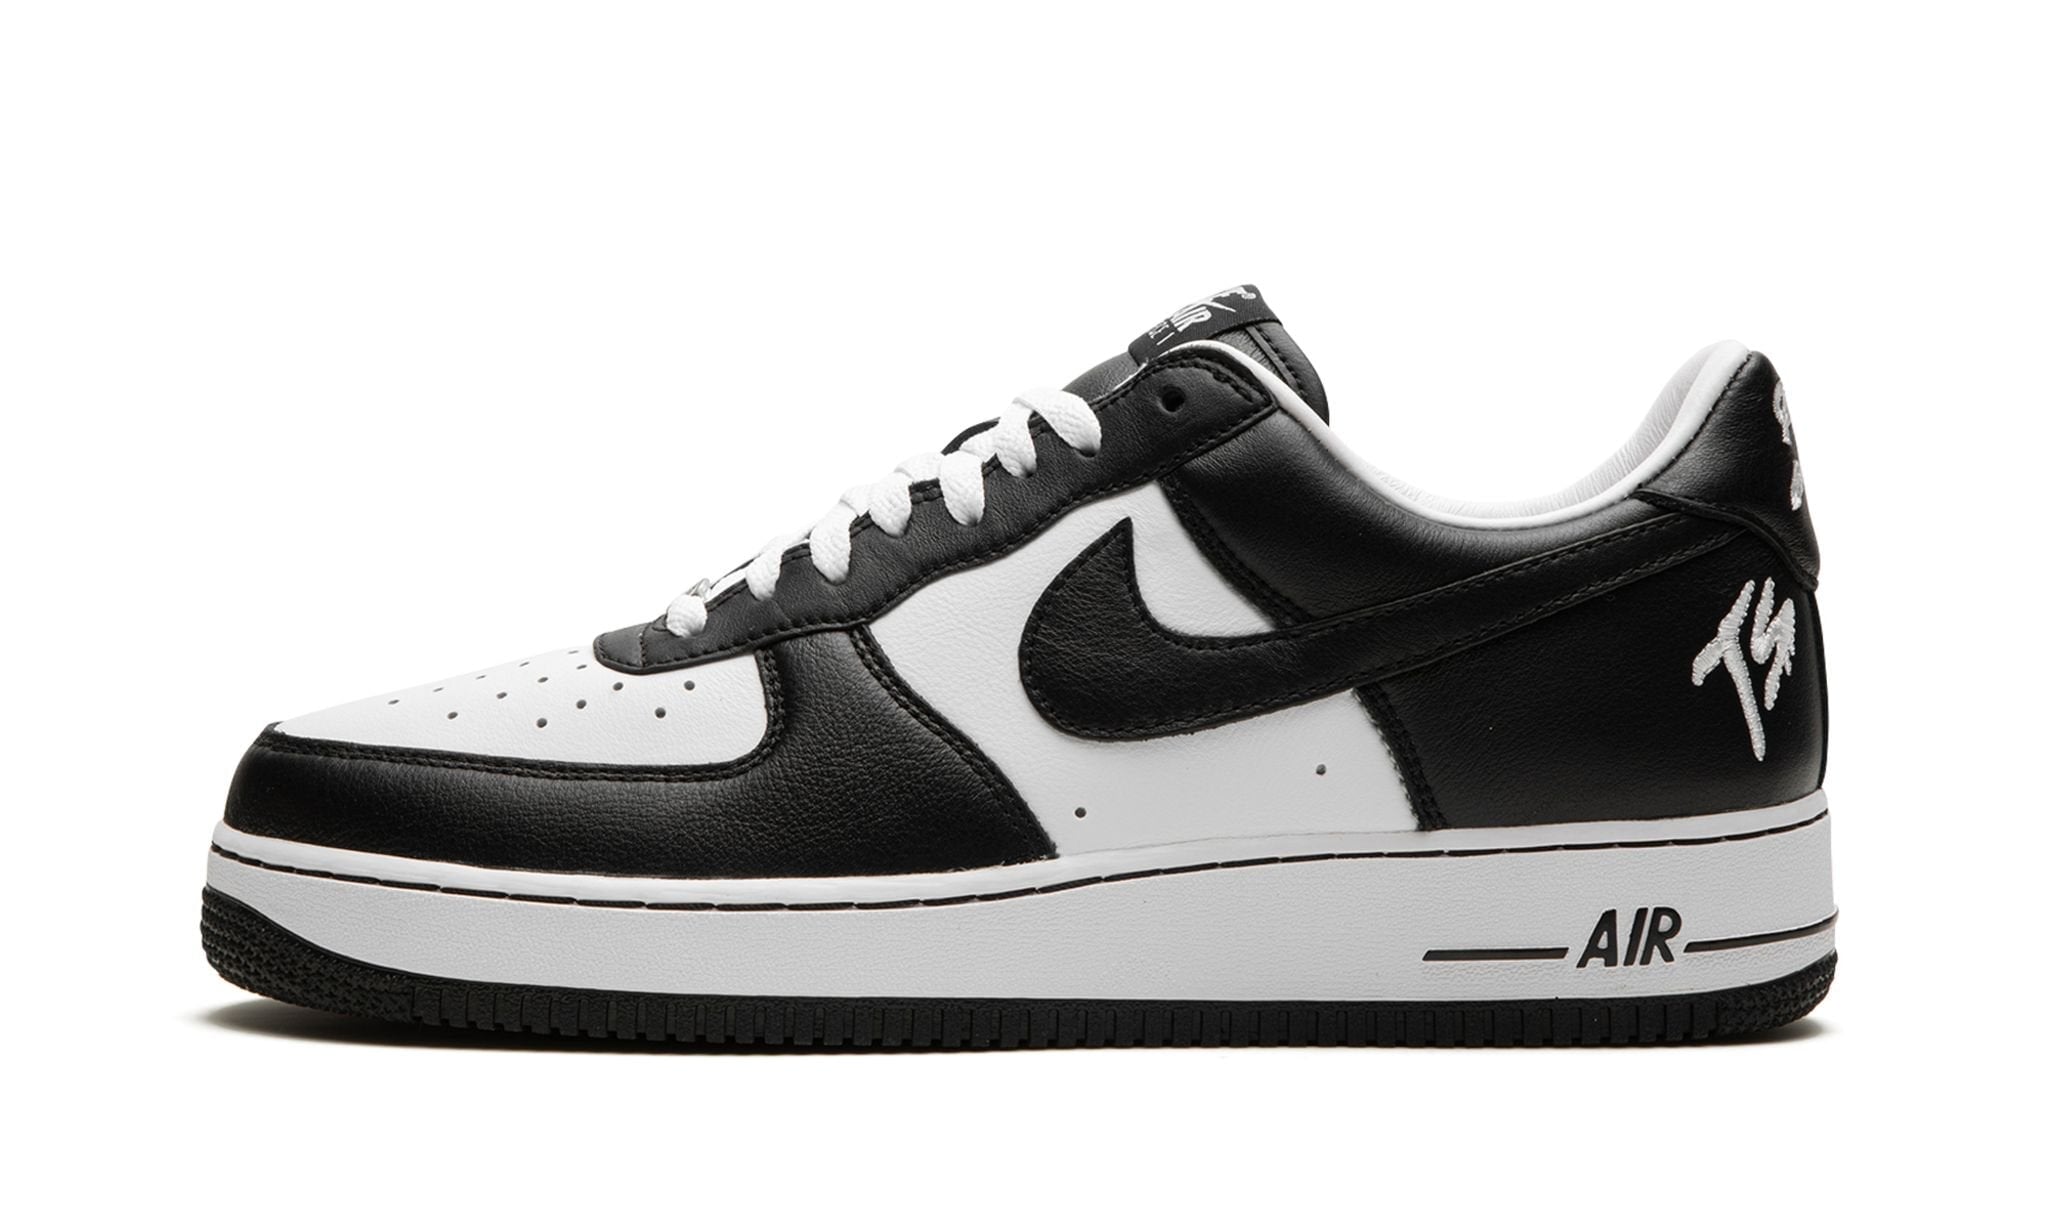 Nike Air Force 1 Low QS Terror Squad Black White product